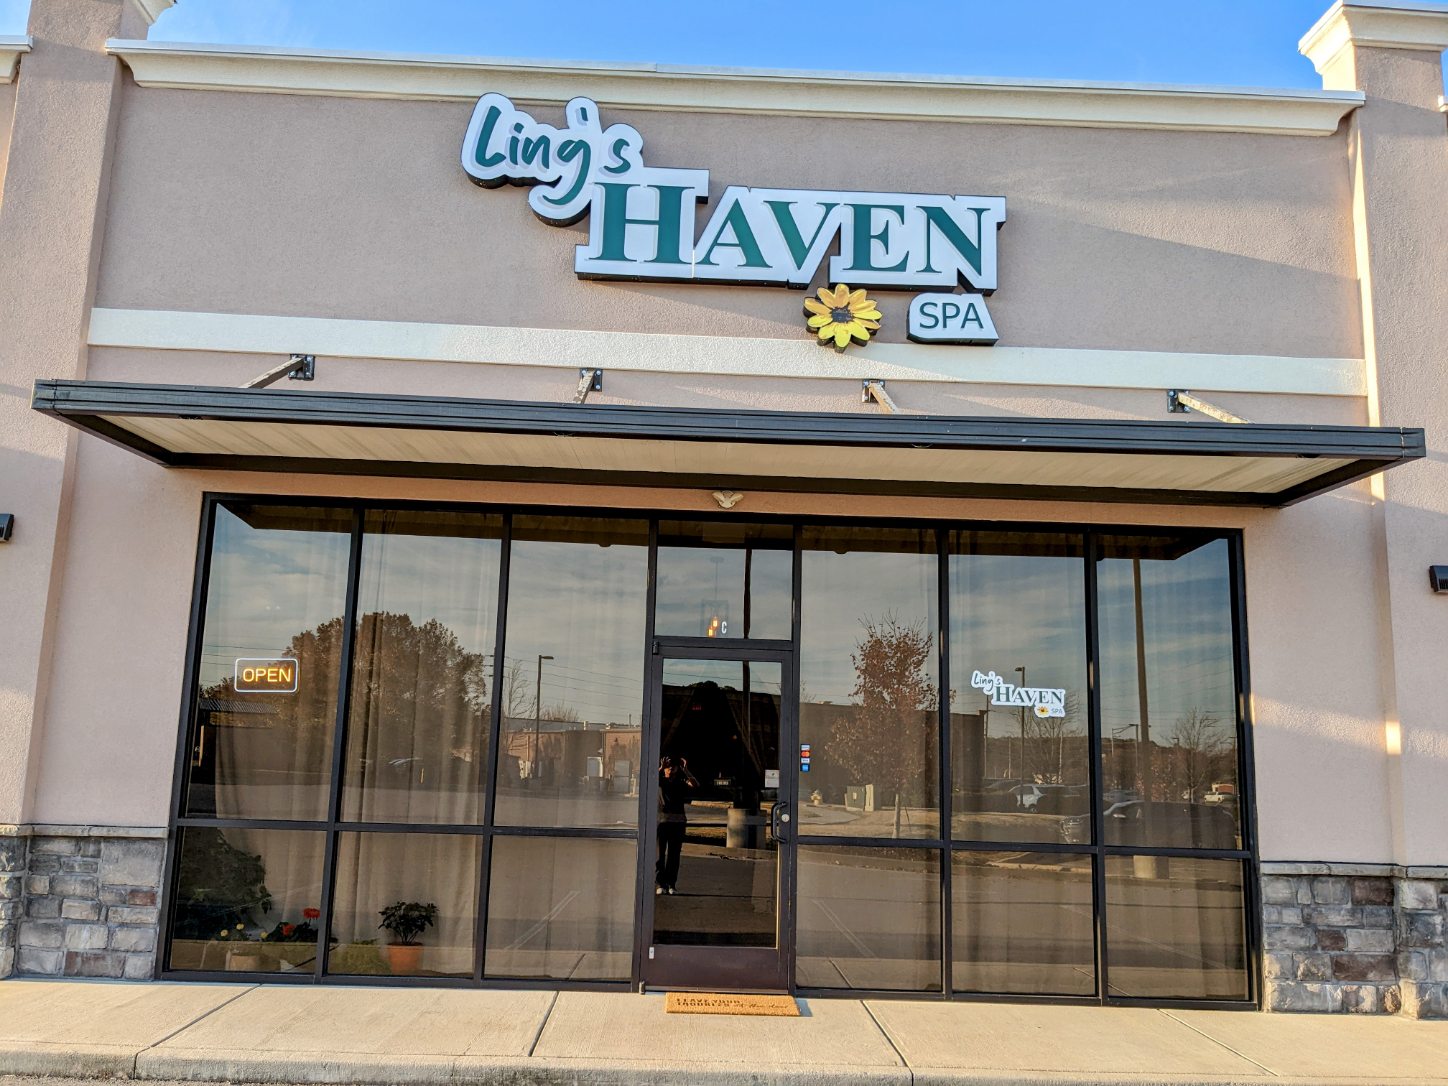 Ling’s Haven Spa